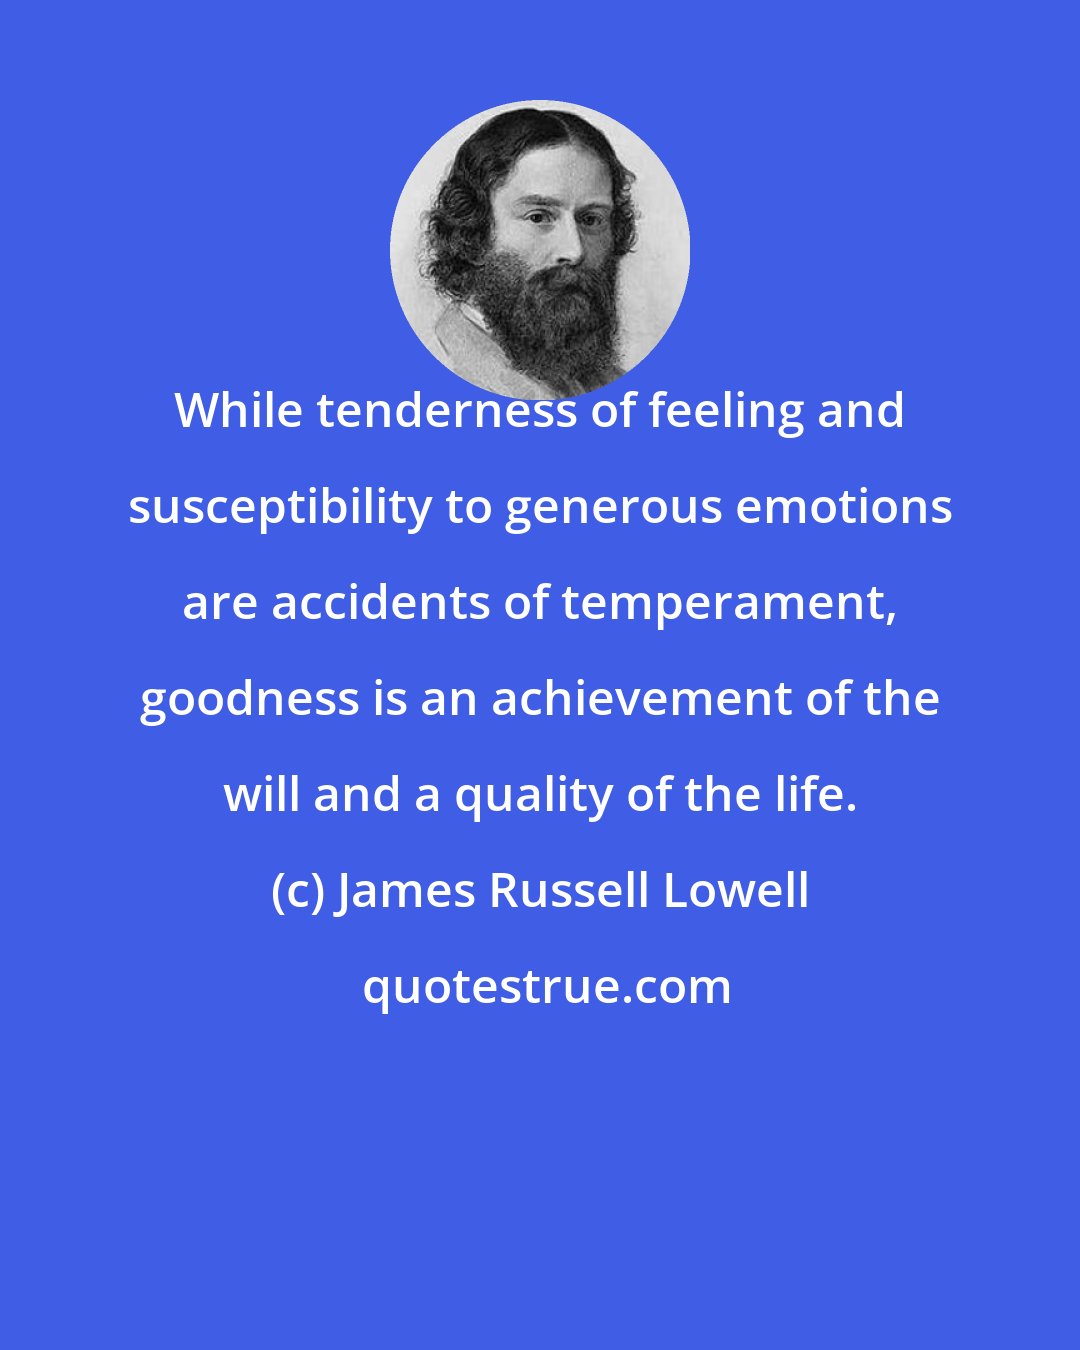 James Russell Lowell: While tenderness of feeling and susceptibility to generous emotions are accidents of temperament, goodness is an achievement of the will and a quality of the life.